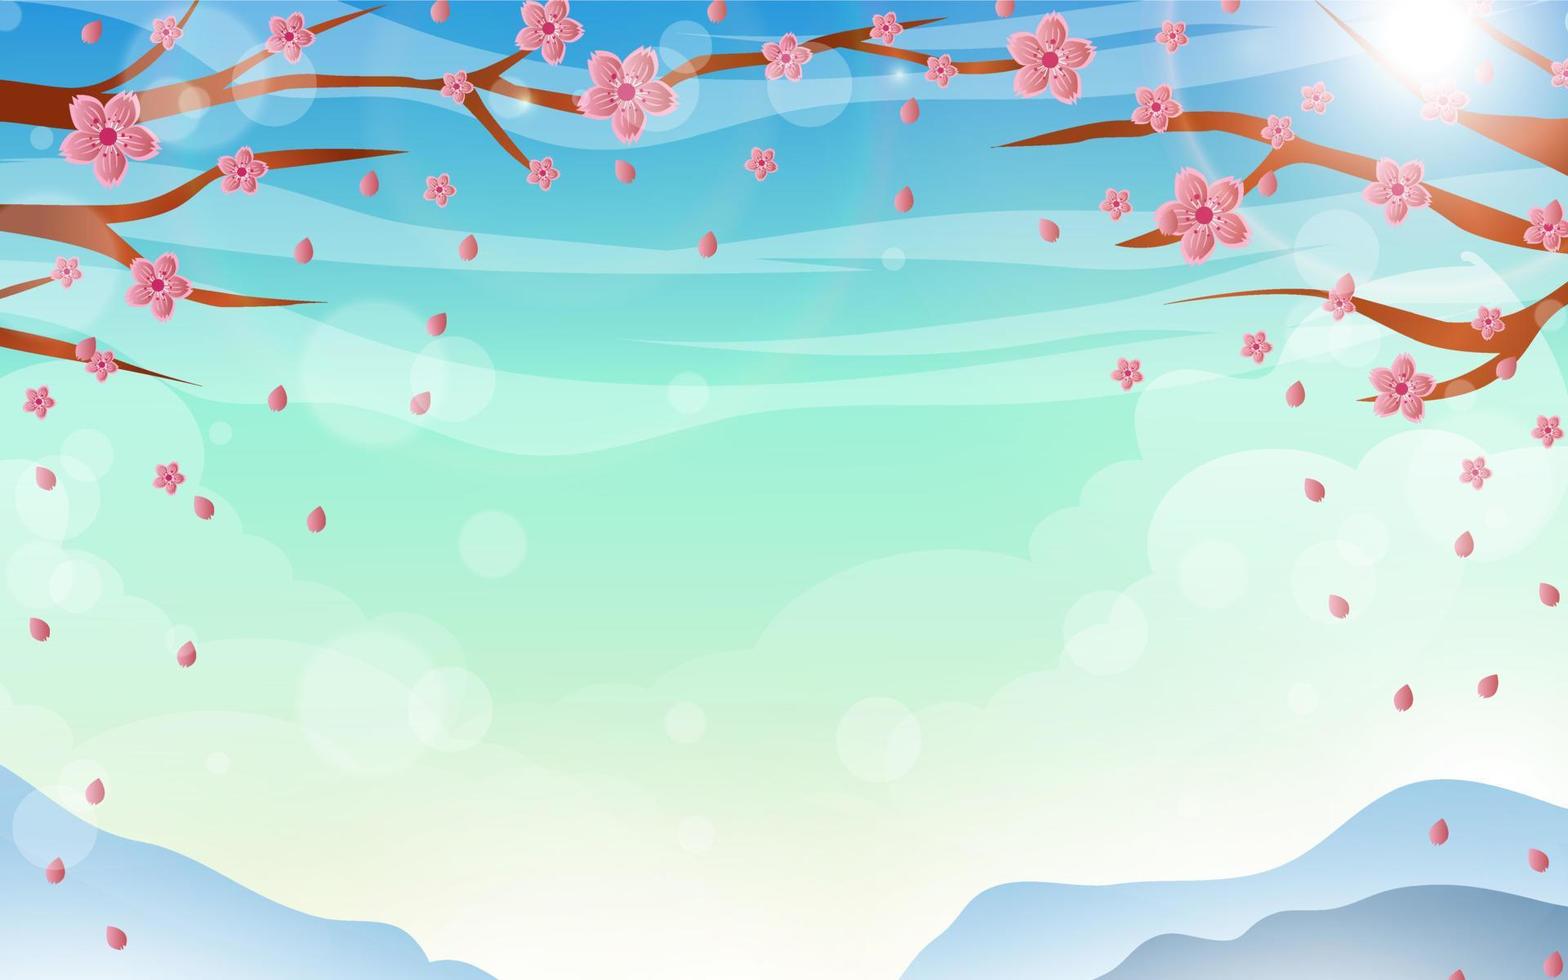 Beauty of Bloomy Cherry Blossom with Sky Background vector